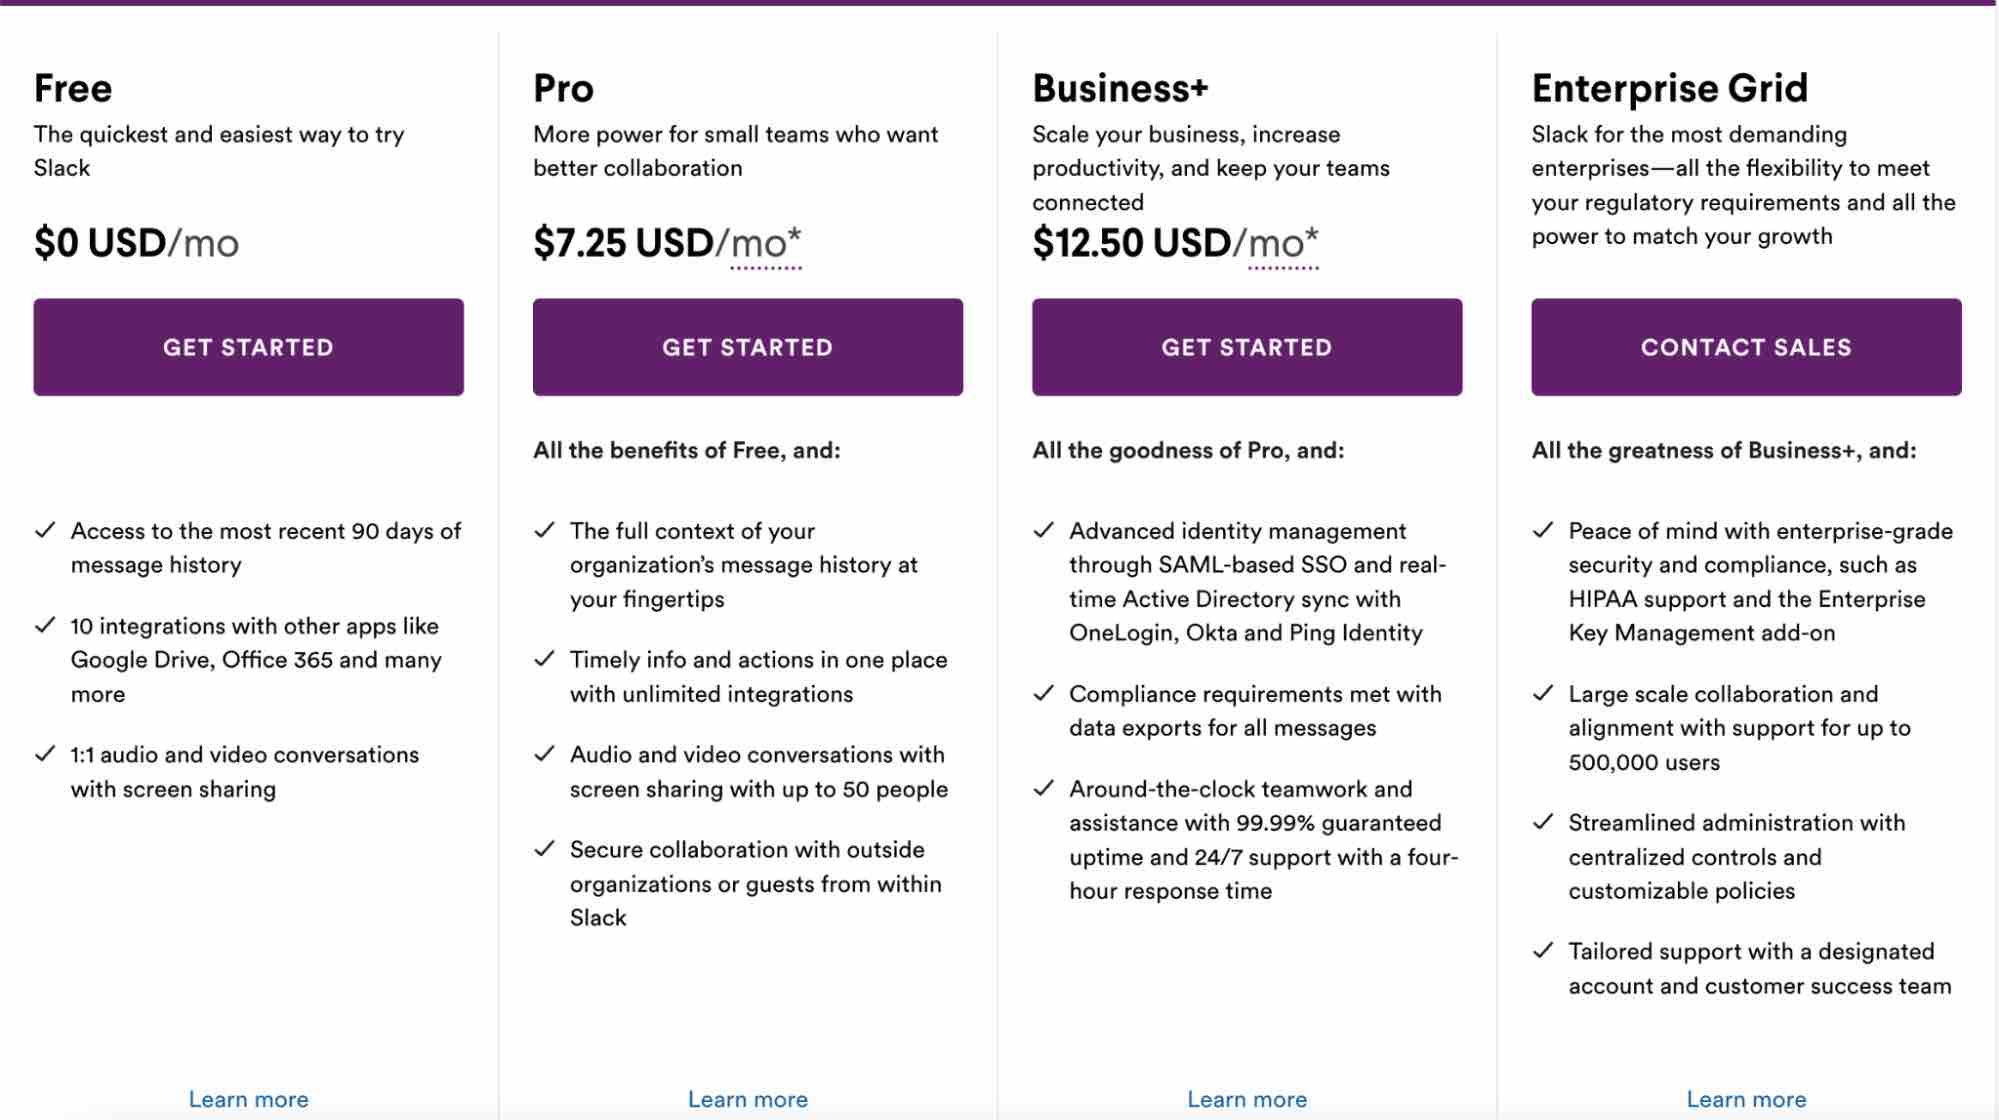 B2B pricing example of user-based pricing, Slack’s B2B pricing page